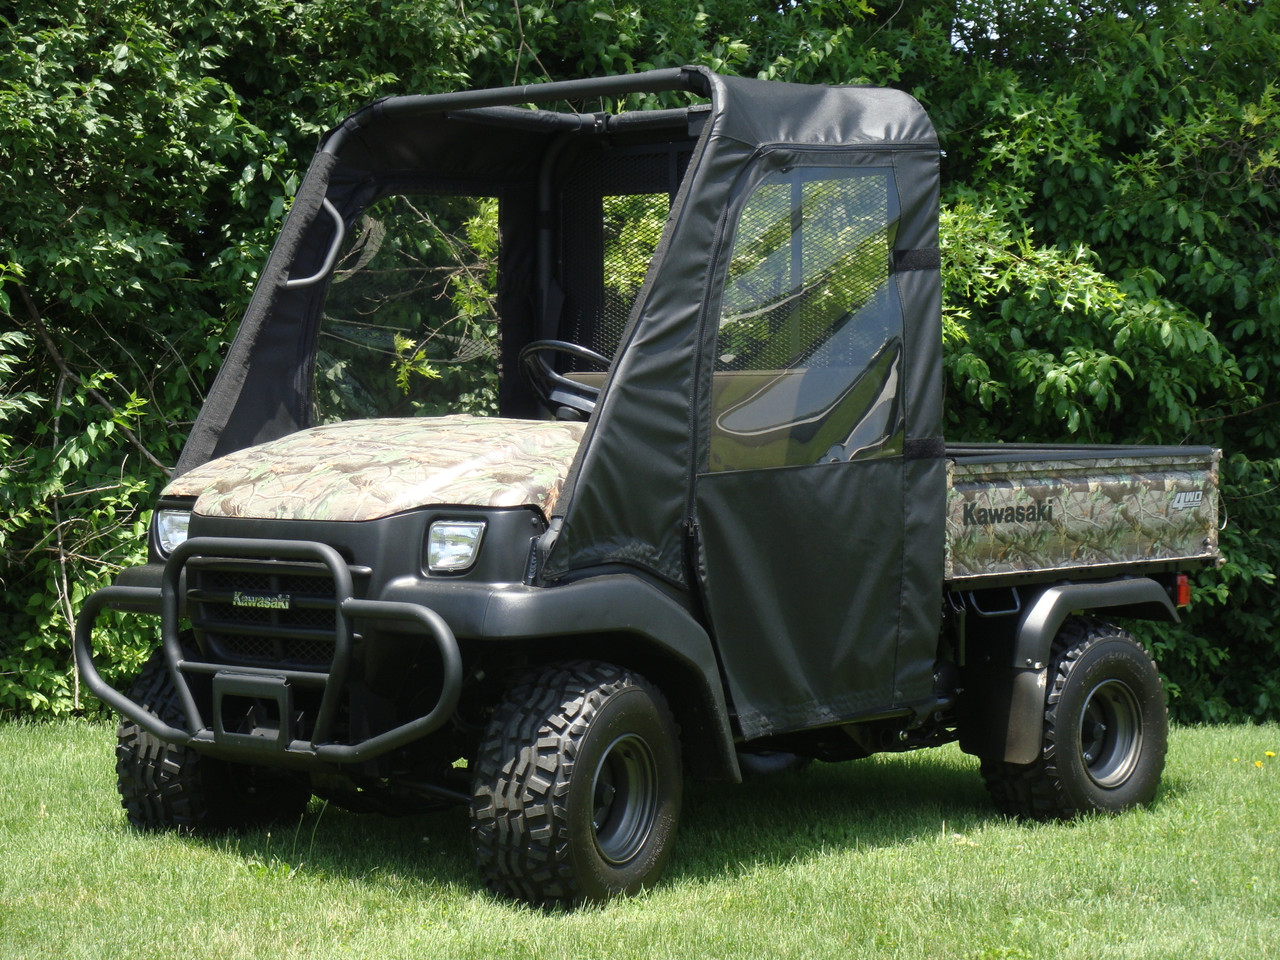 3 Star side x side Kawasaki Mule 3000/3010 doors and rear window side and front angle view